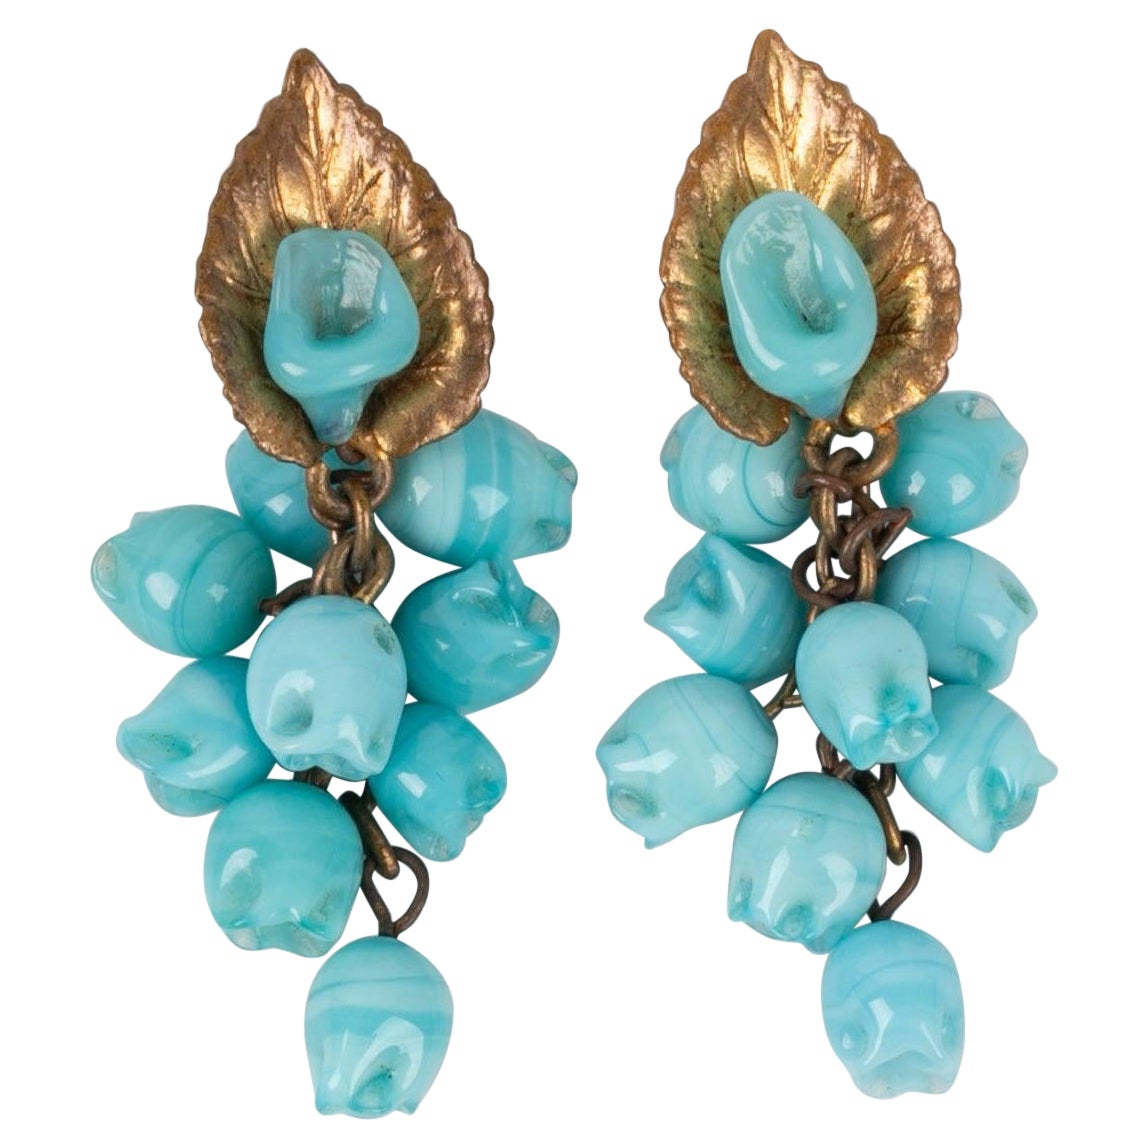 Maison Rousselet Golden Metal Earrings with Blue Glass Paste For Sale